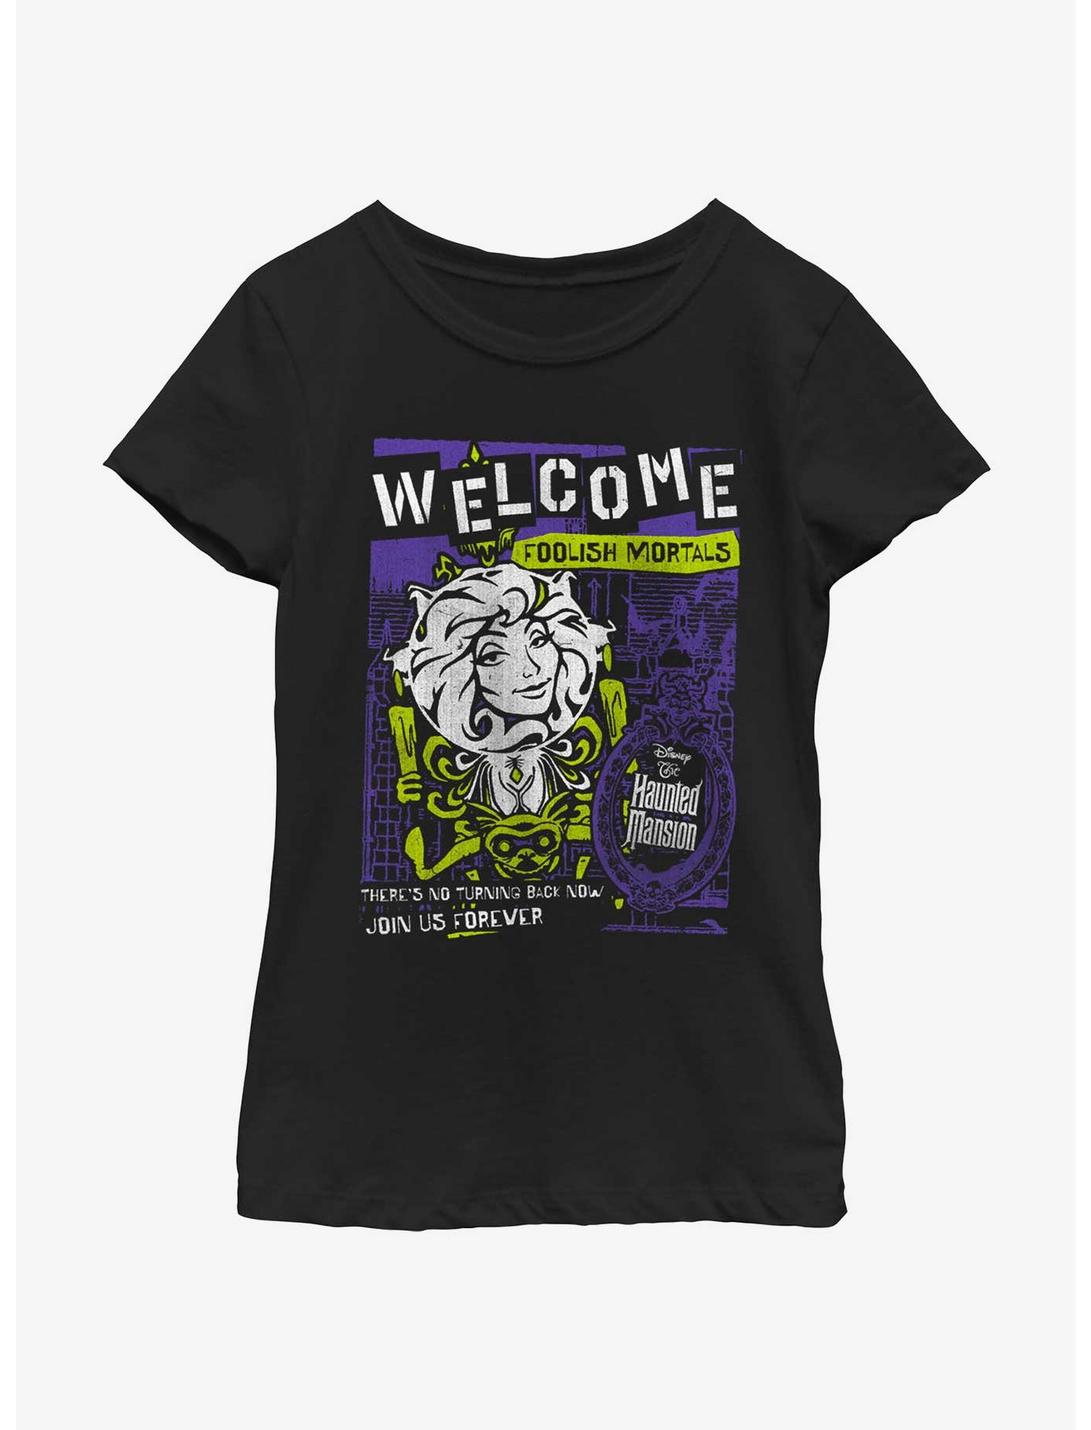 Disney Haunted Mansion Leota Toombs Welcome Poster Youth Girls T-Shirt, BLACK, hi-res